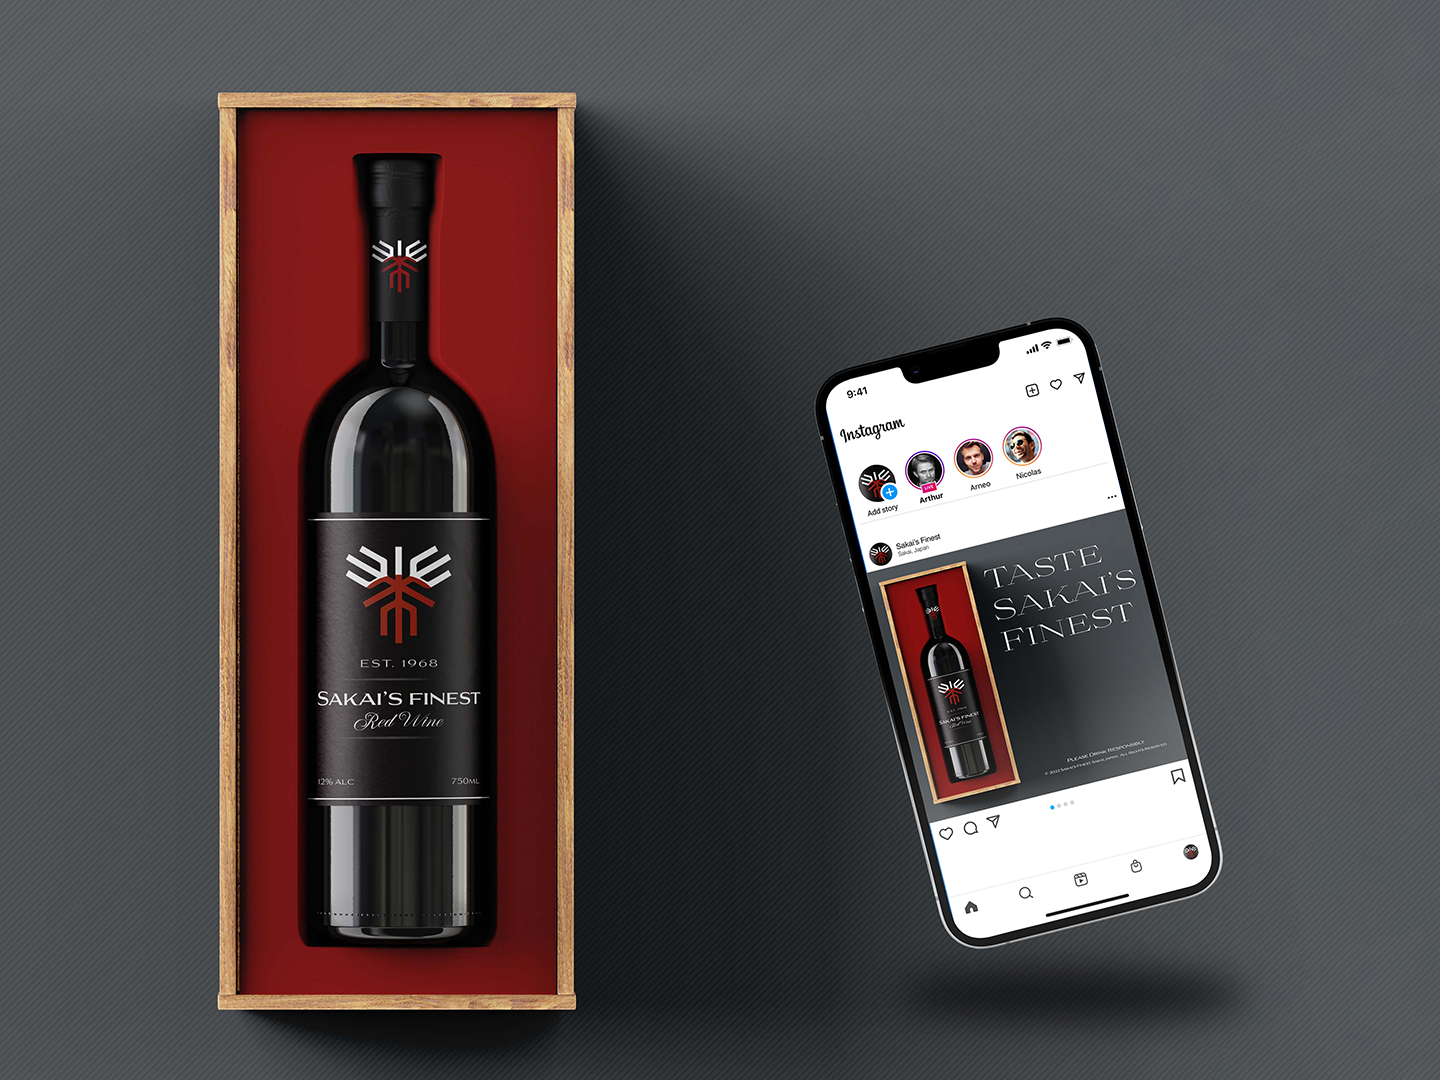  / “Sakai’s Finest,” Product design and social media ad, 2021. A luxury wine imported from Sakai, Japan.